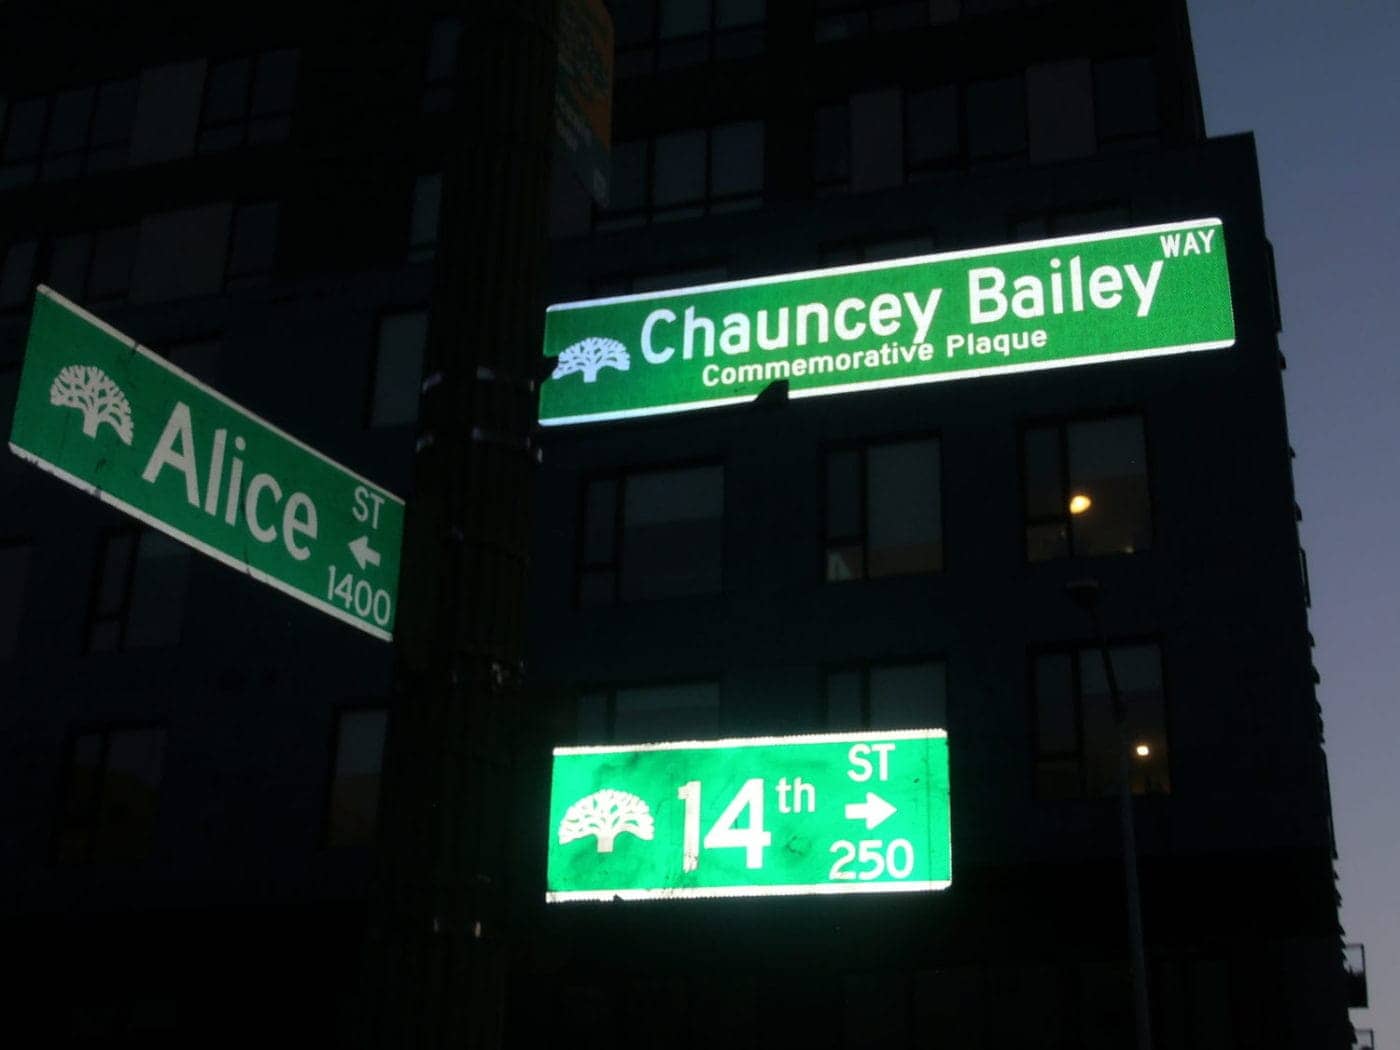 Chauncey-Bailey-Way-Oakland-1400x1050, Beware of the hype from the Big-Time Gangsters!, Culture Currents 